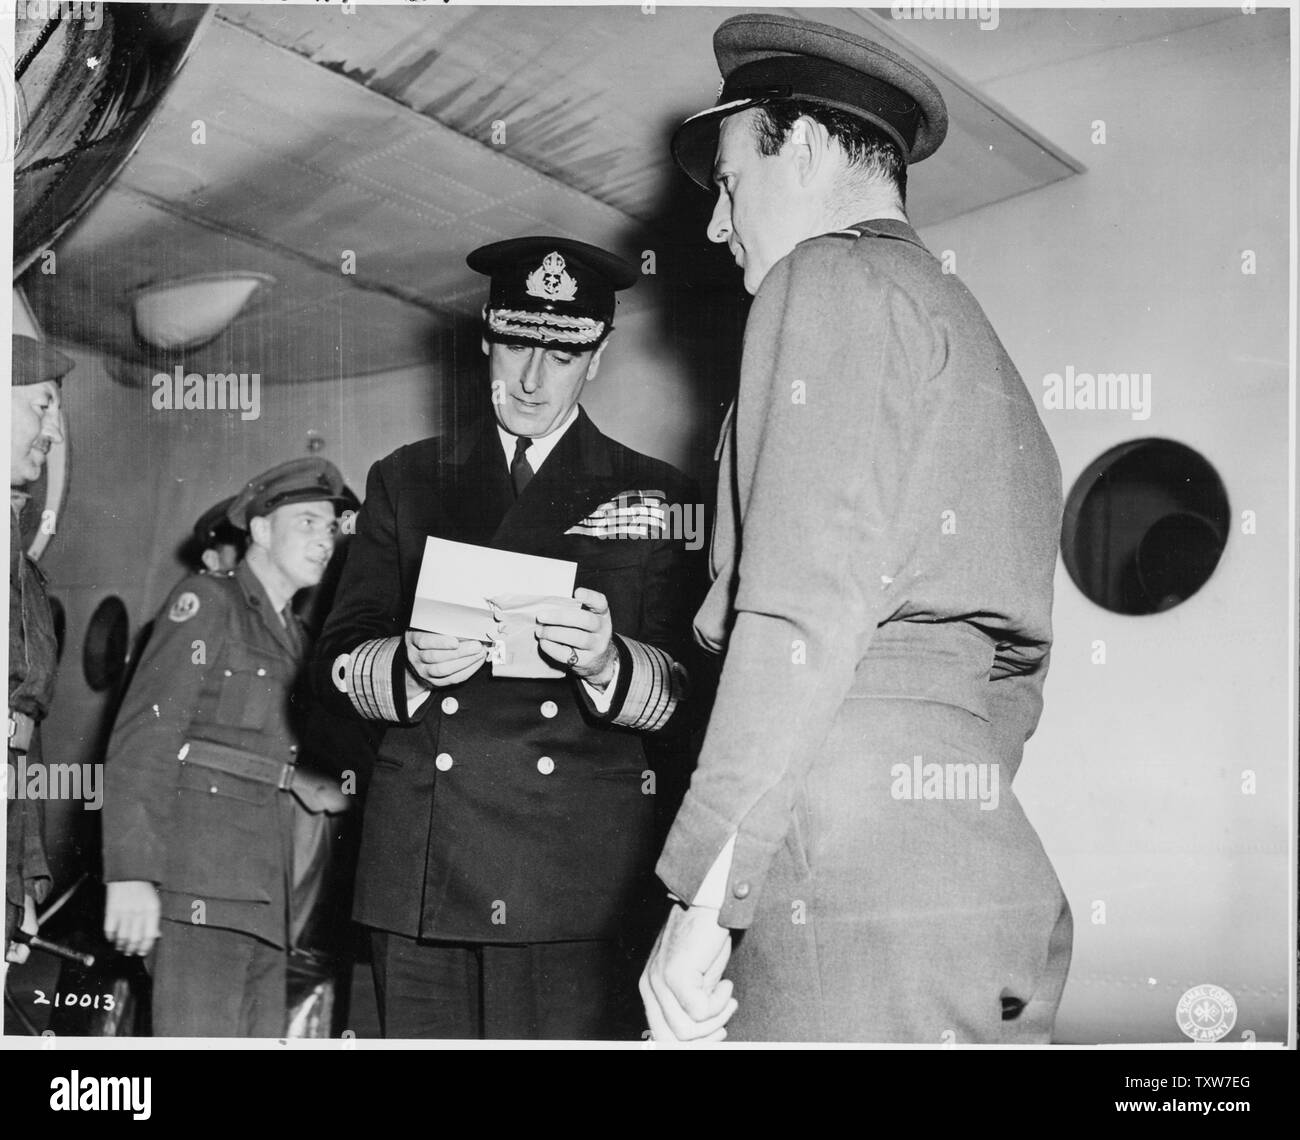 Adm. Lord Louis Mountbatten, cousin of the King of England and Commander of the Southeast Asia Command, reads a dispatch which was handed him upon his arrival at Gatow Airport in Berlin, Germany for the Potsdam Conference. Stock Photo